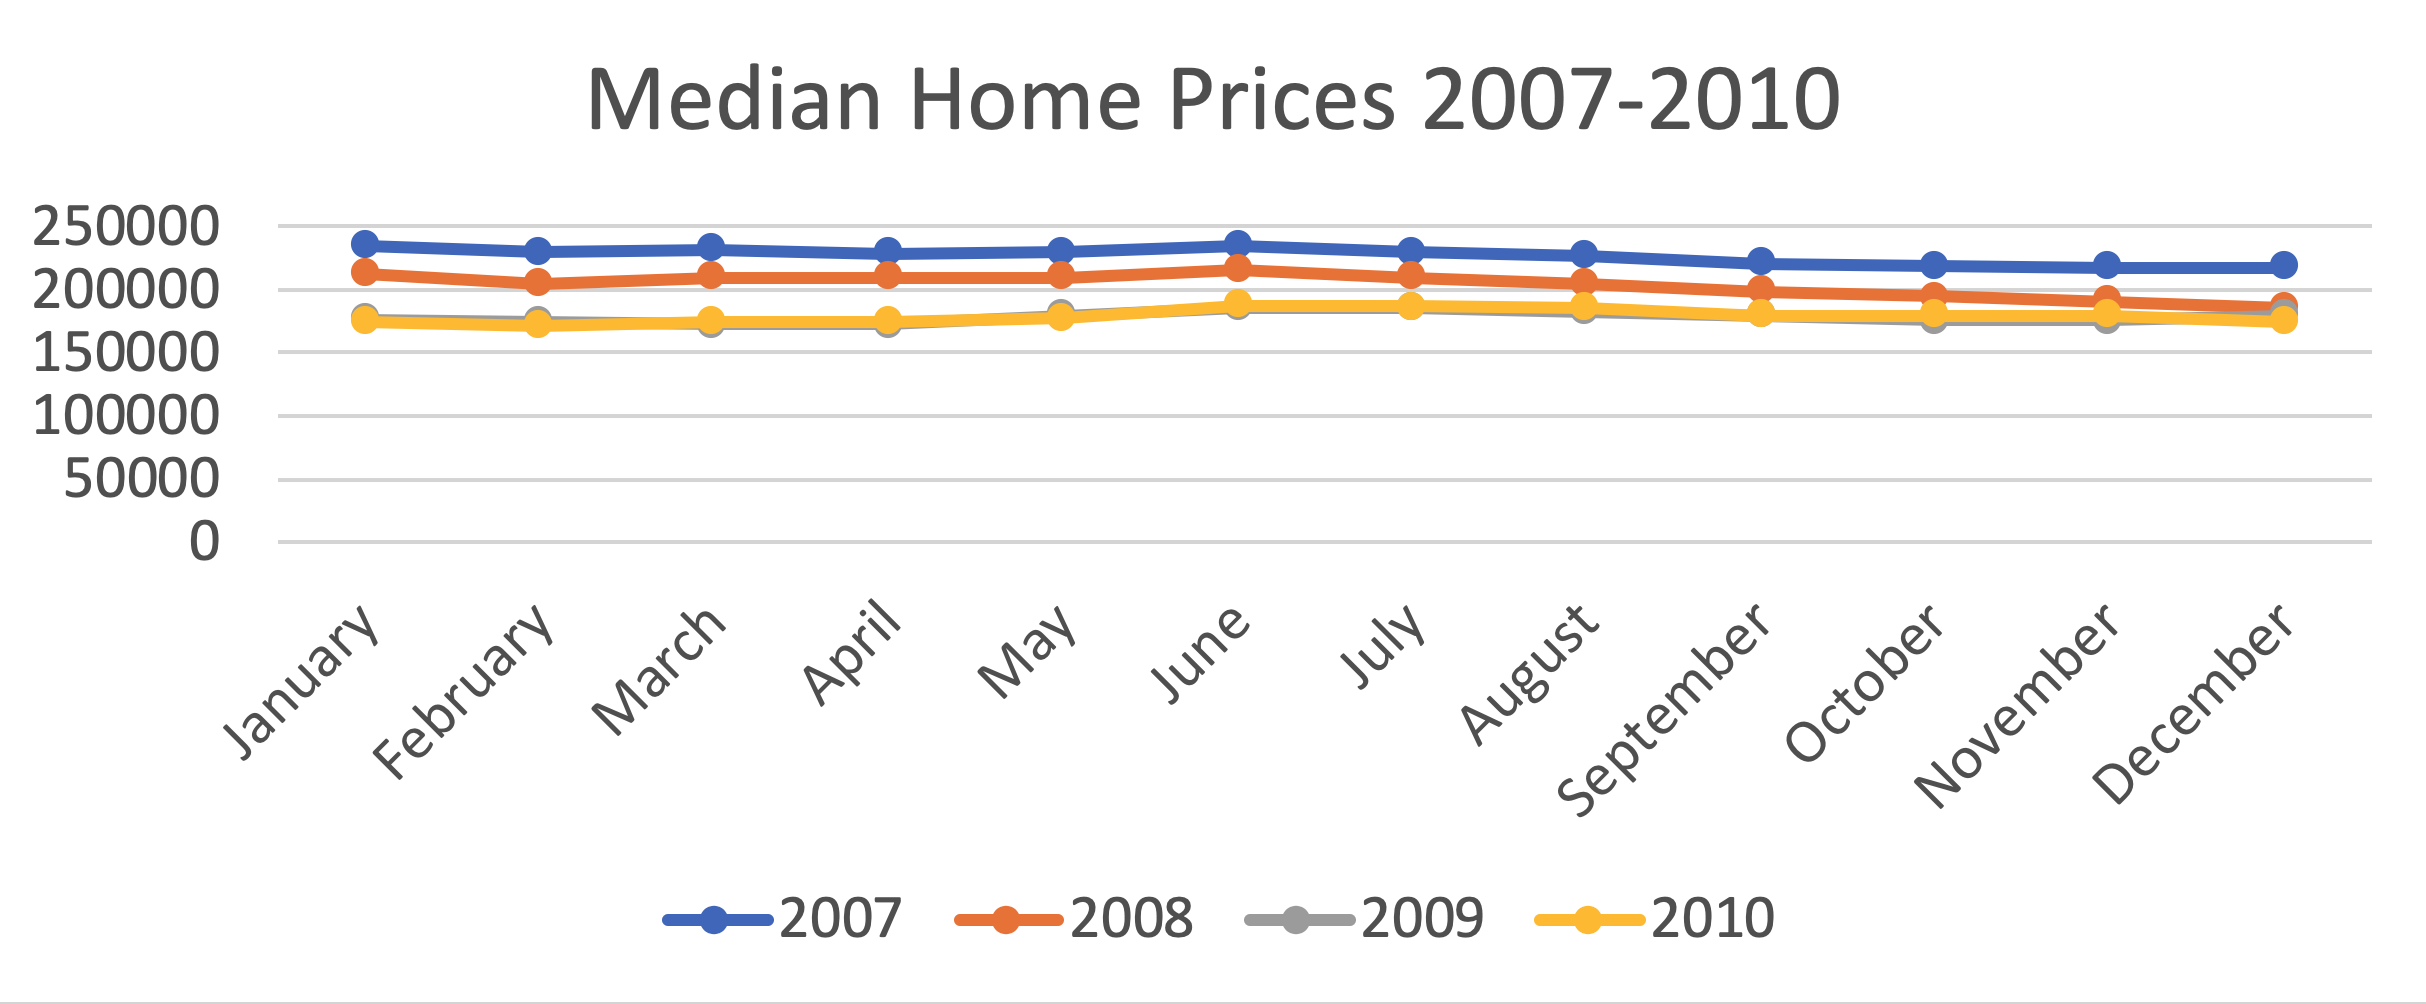 median home prices 2007-2010